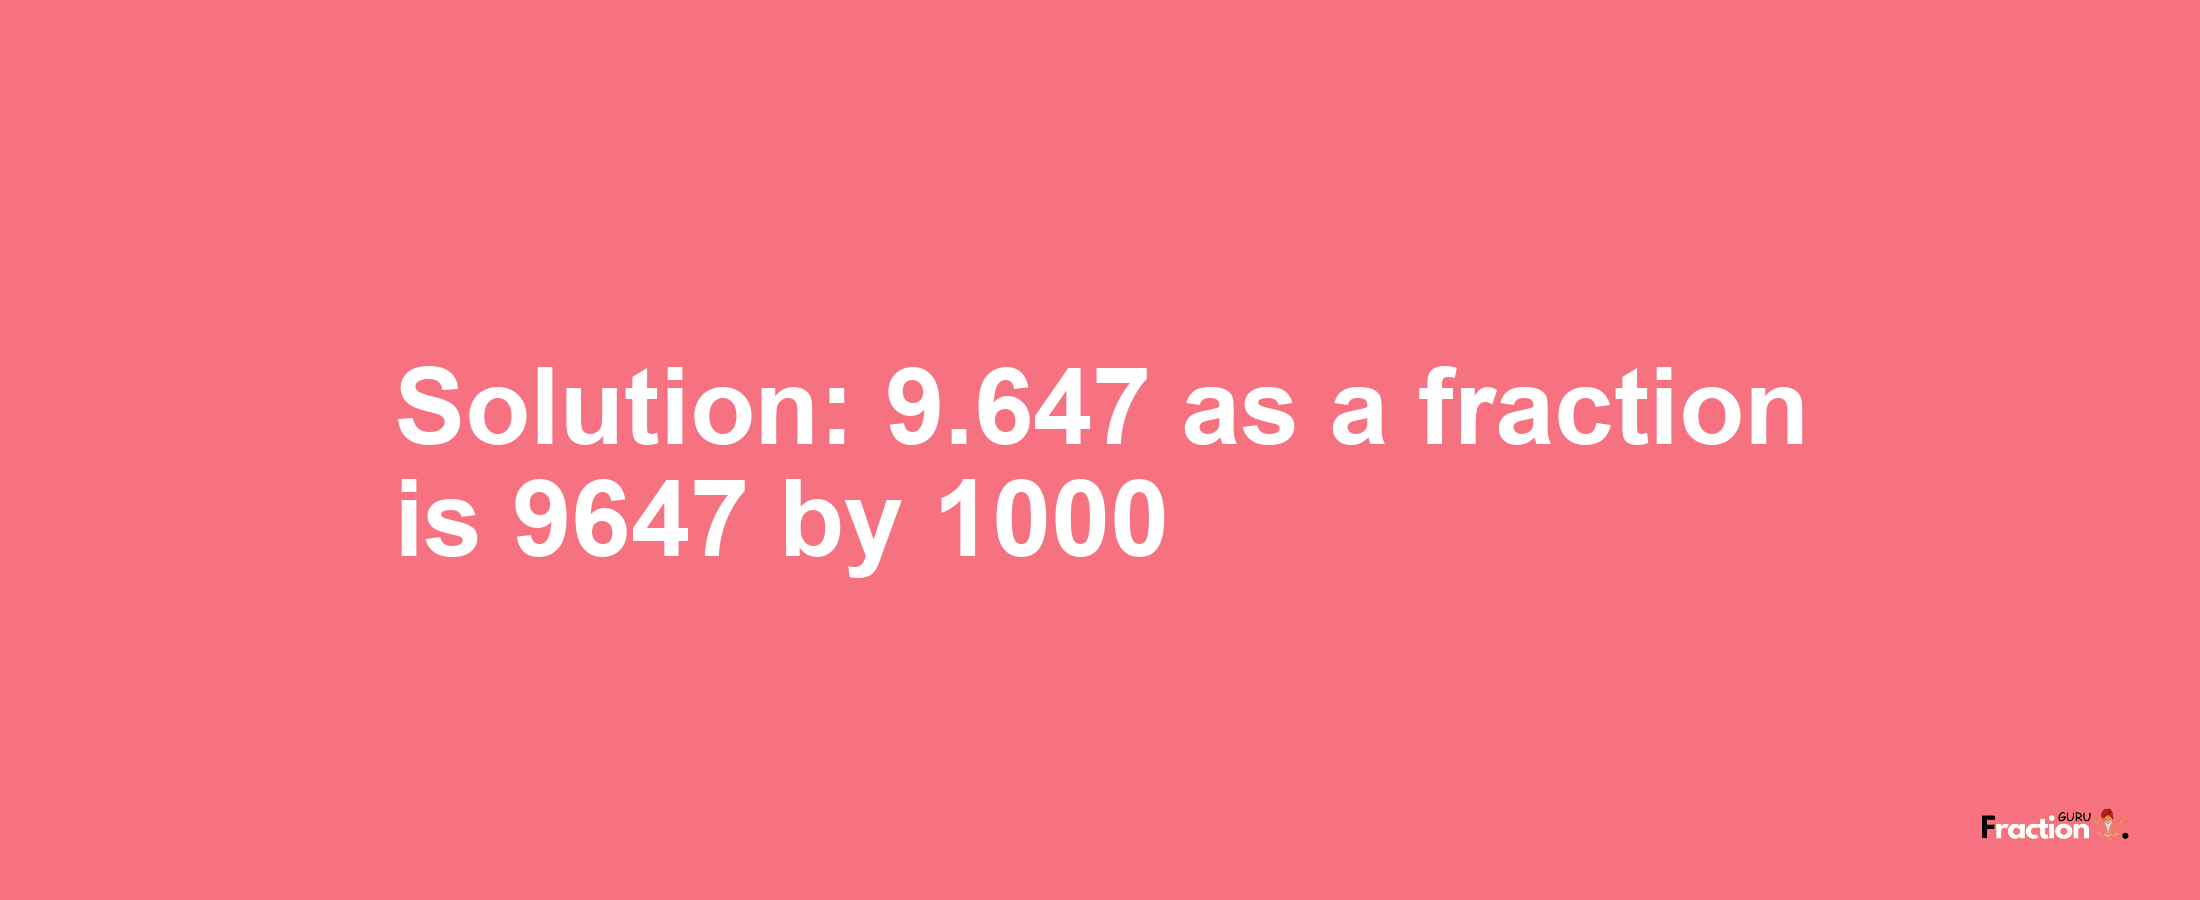 Solution:9.647 as a fraction is 9647/1000